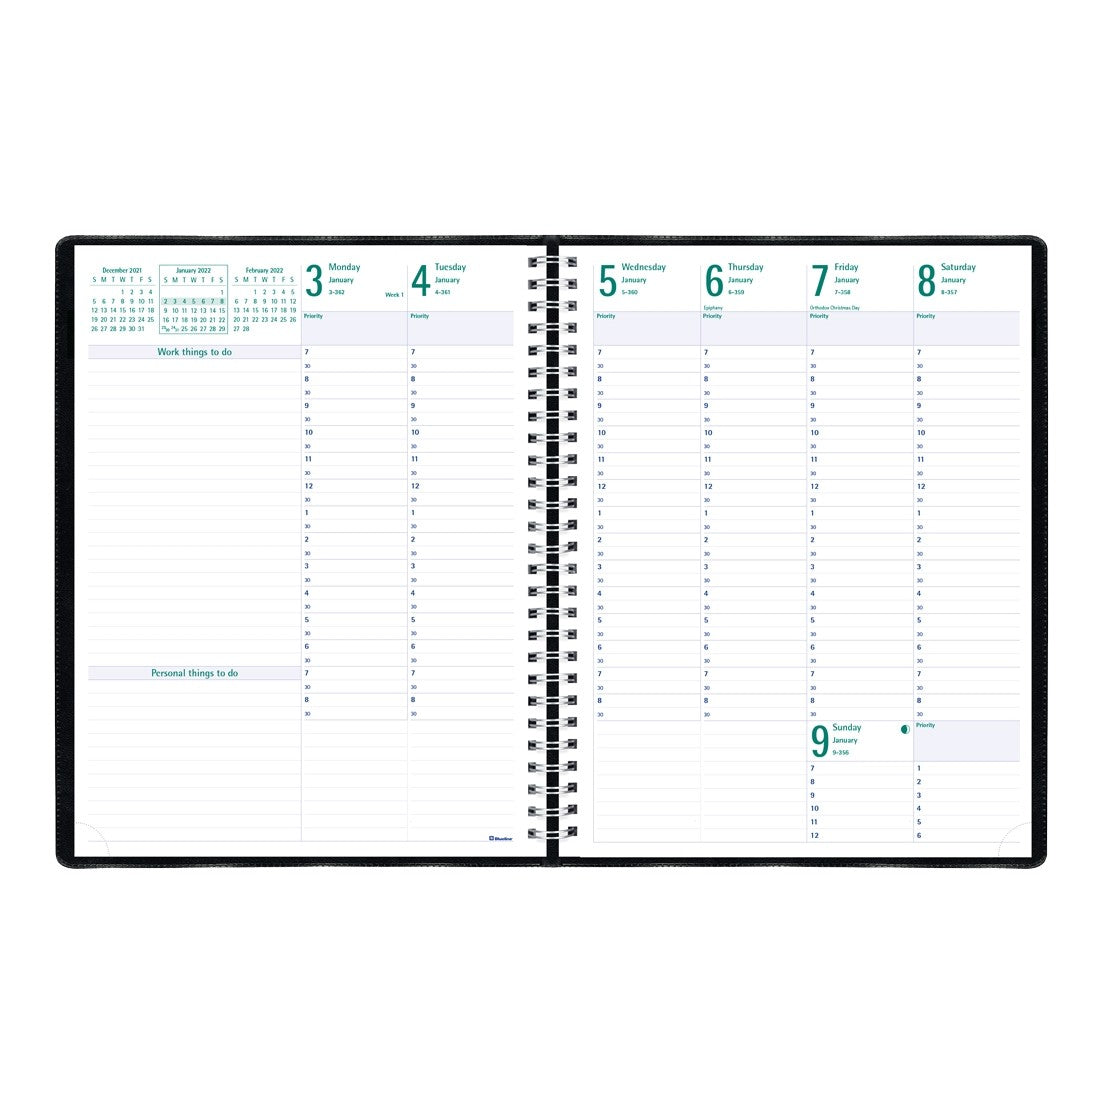 Timanager Weekly Planner - 8 1/2" x 11" - Black Cover | Atlas Stationers.